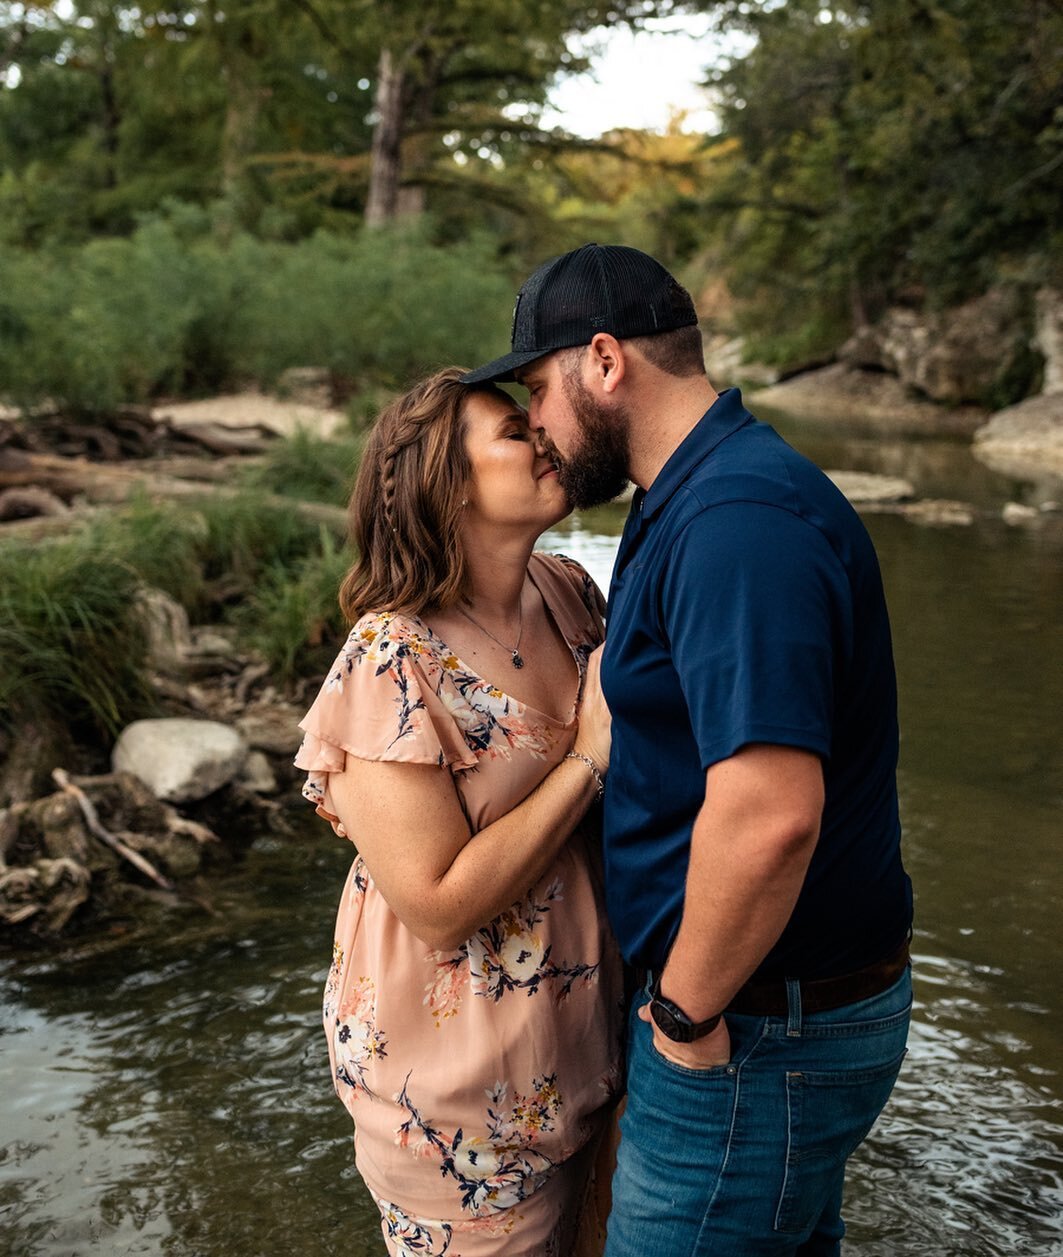 Nose kisses only from here on out!🥲🥺⁣
⁣
⁣
⁣
⁣
#texasphotographer #texasparks #mckinneyfalls #engagementphotos #couplesphotography #adventurephotography #adventurephotographer #photographersofinstagram #austinphotographer #atxphotographer #texasgirl